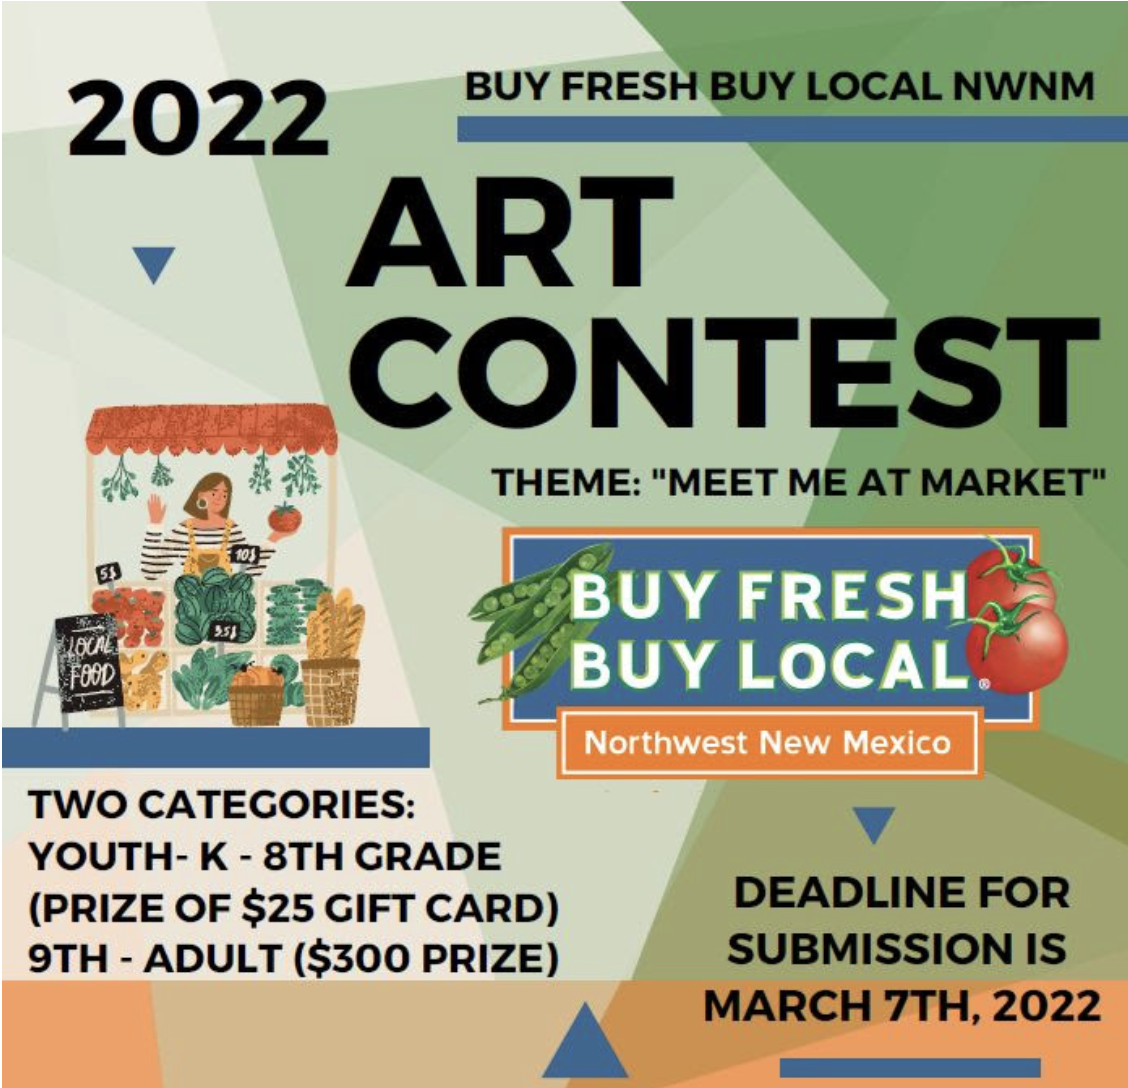 A poster advertising the March 2022 art contest encouraging people to buy fresh and local.